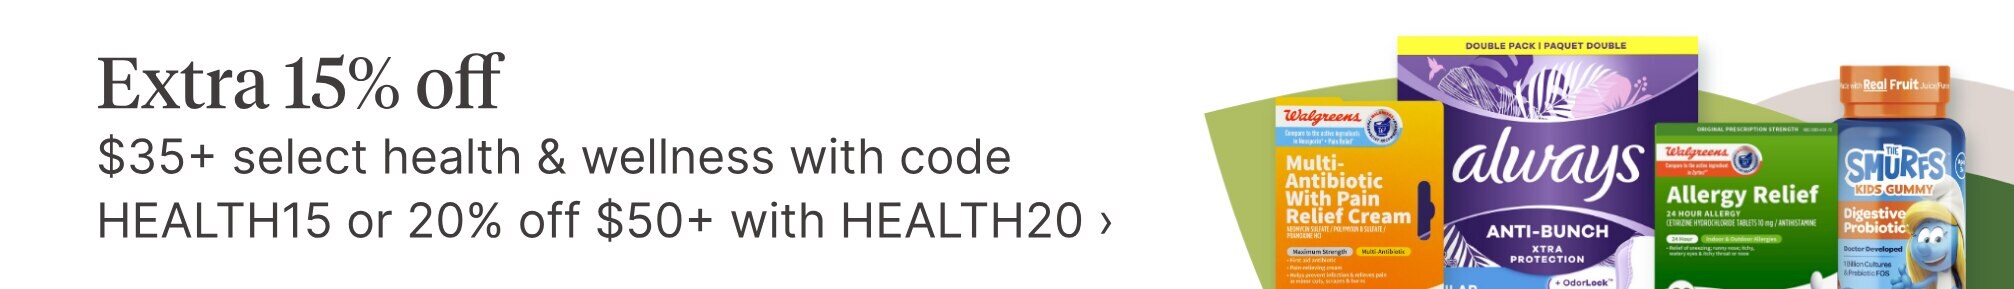 Extra 15% off $35+ select health & wellness with code HEALTH15 or 20% off $50+ with HEALTH20.